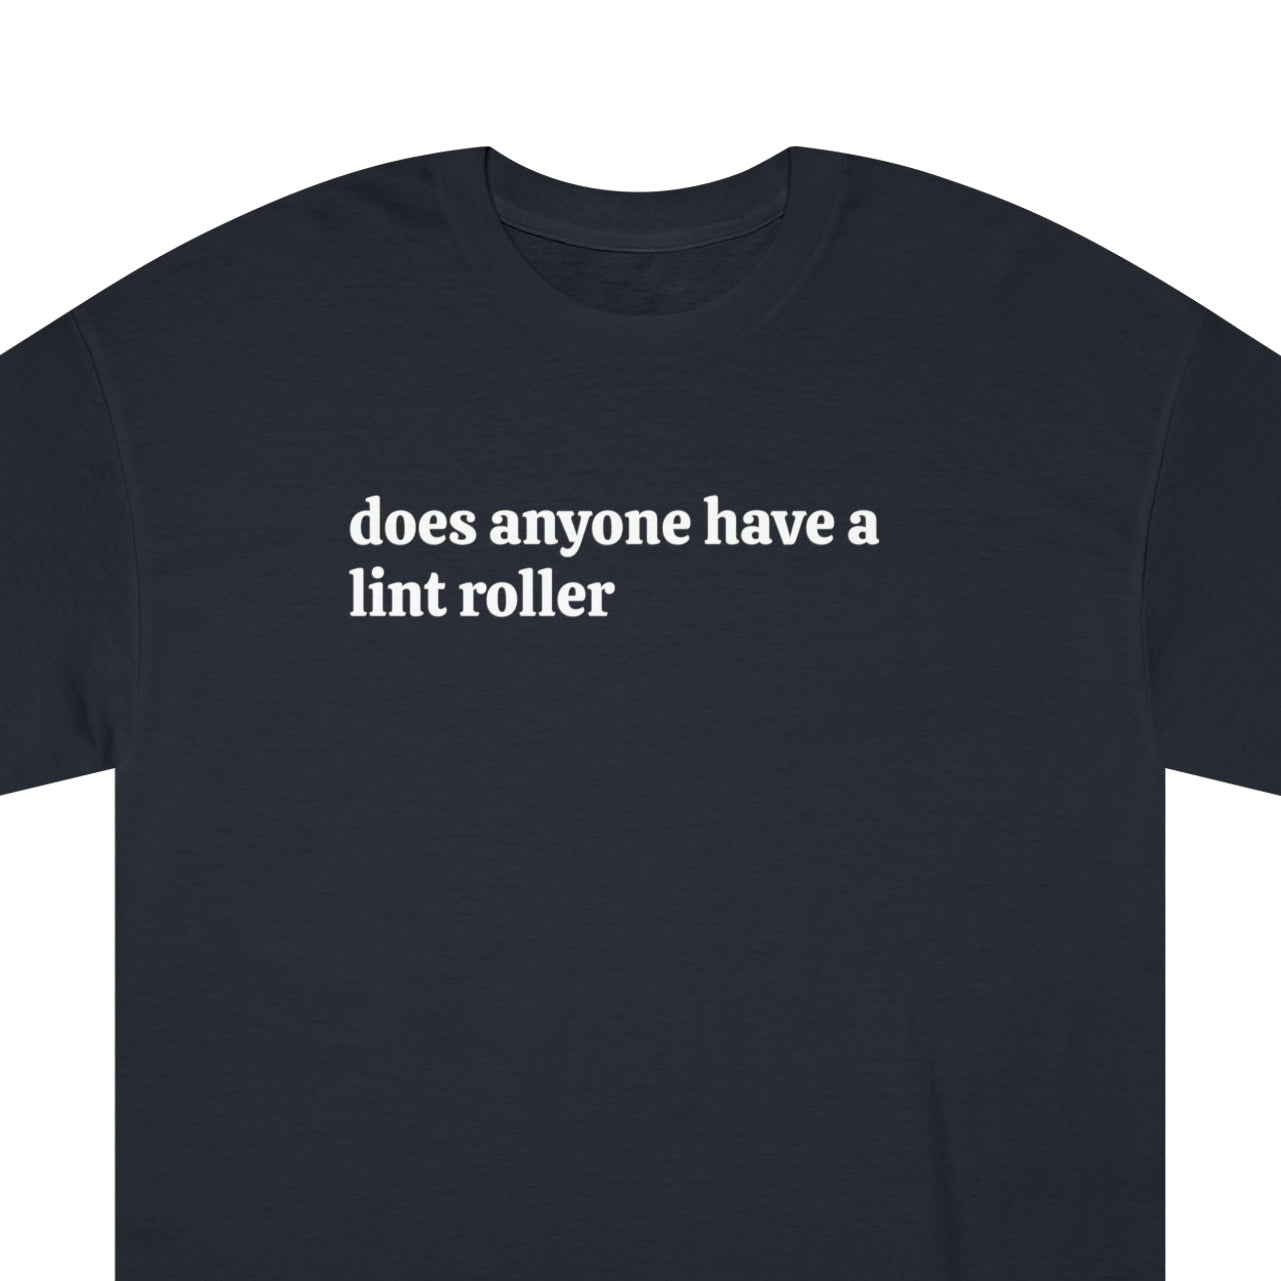 Zoomed in view of a black T-shirt with humorous phrase 'Does anyone have a lint roller' in white font.